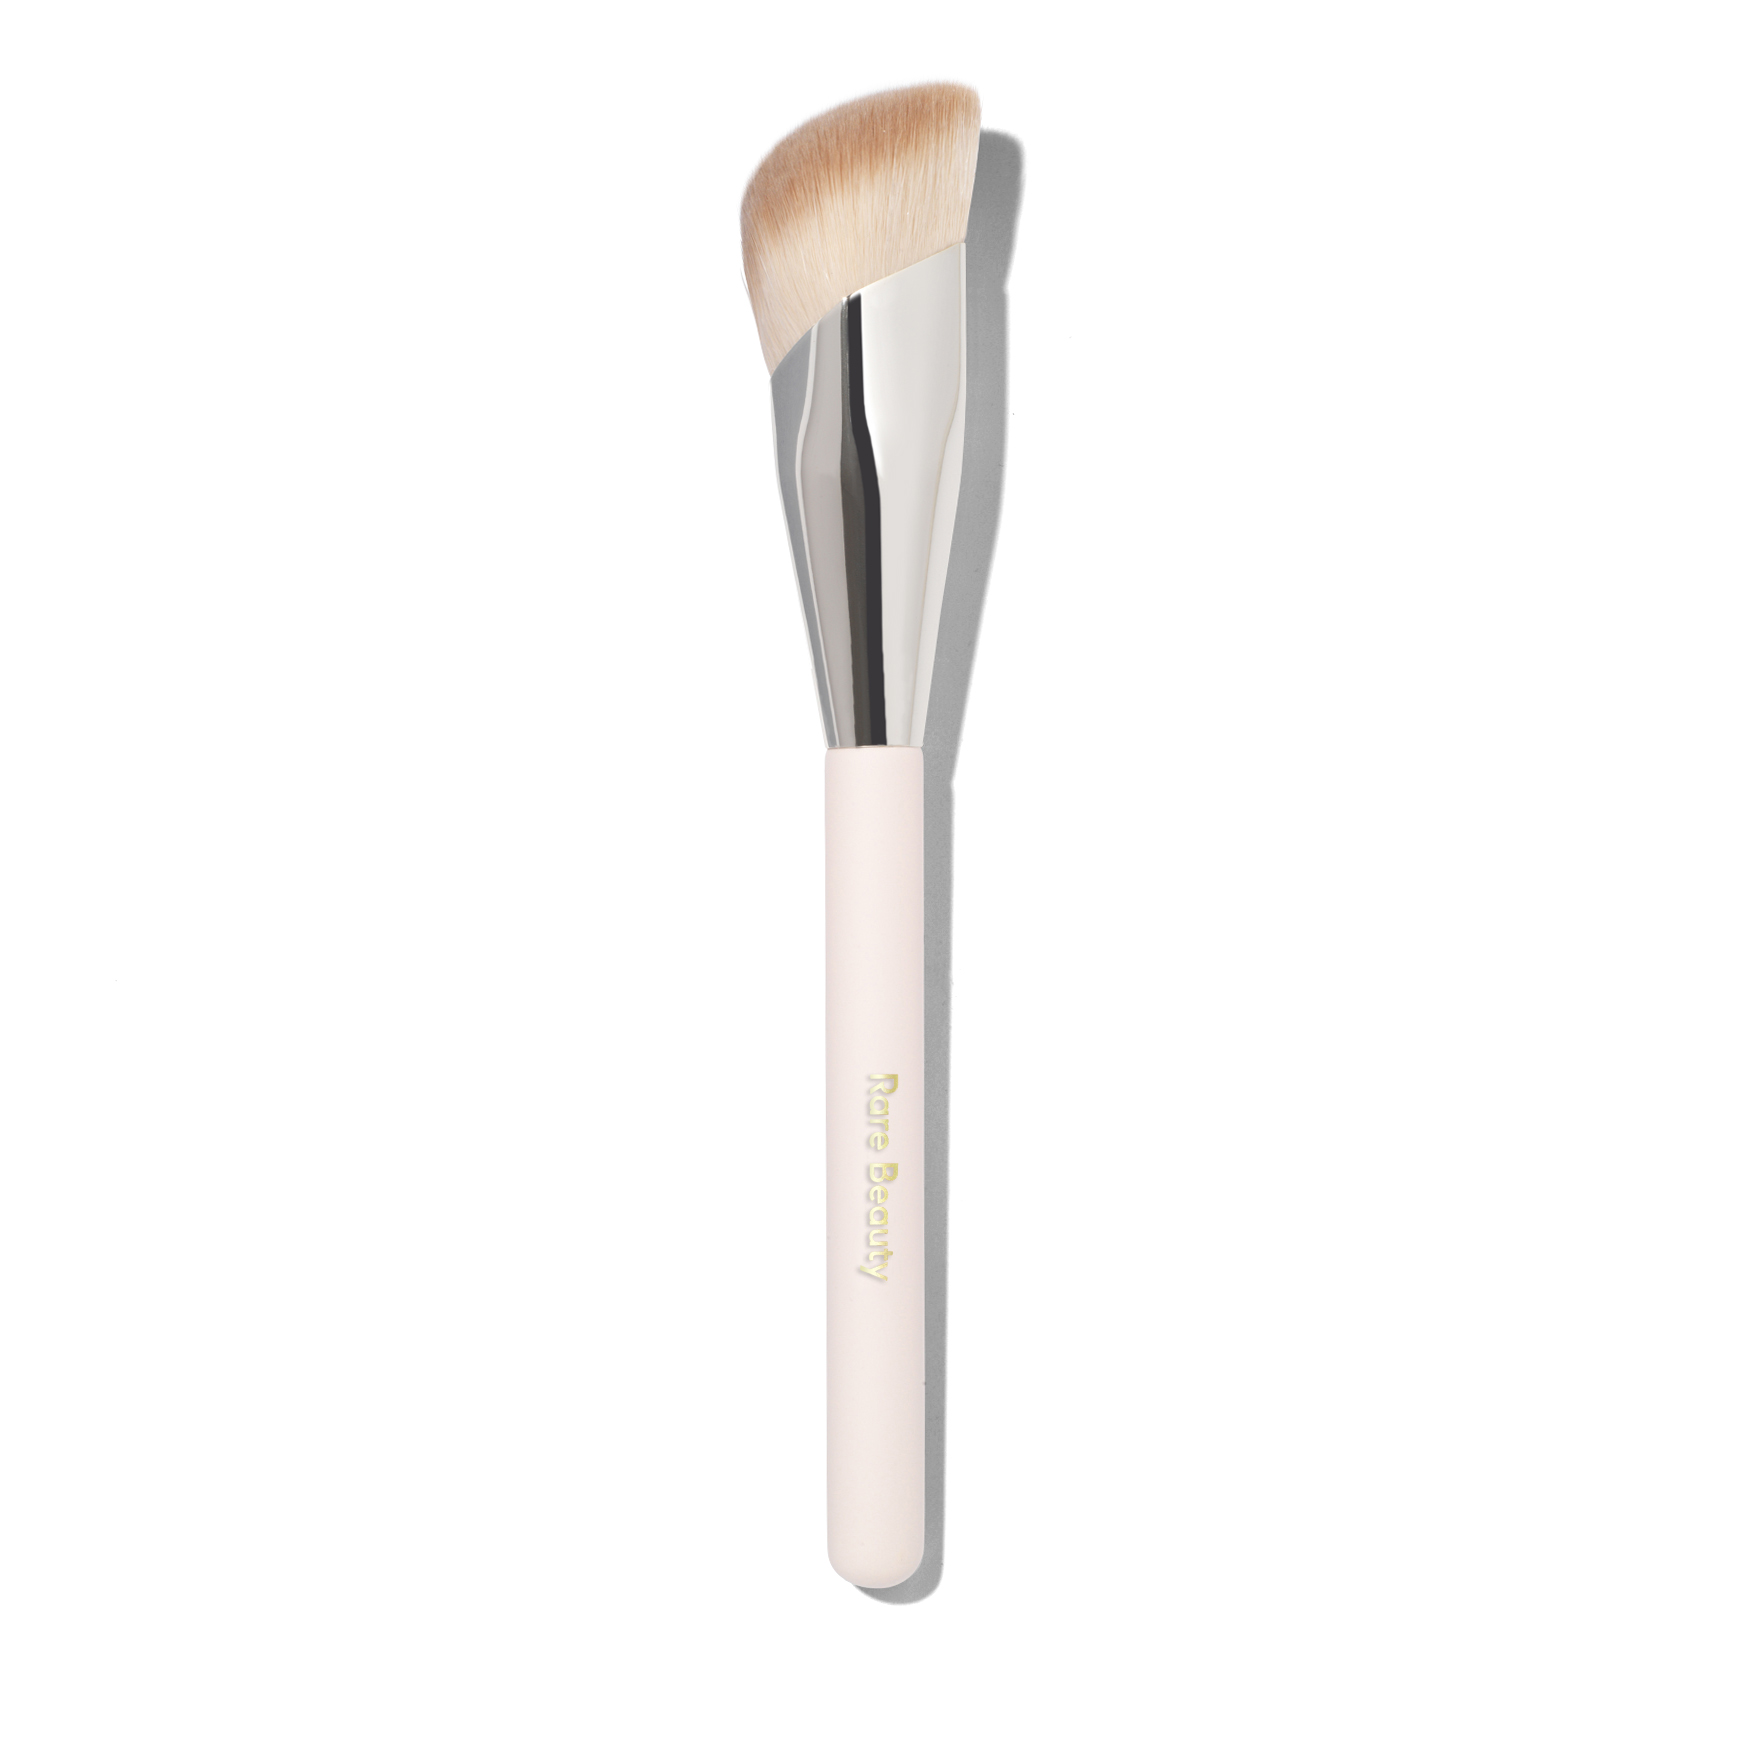 Rare Beauty Liquid Touch Foundation Brush | Space NK